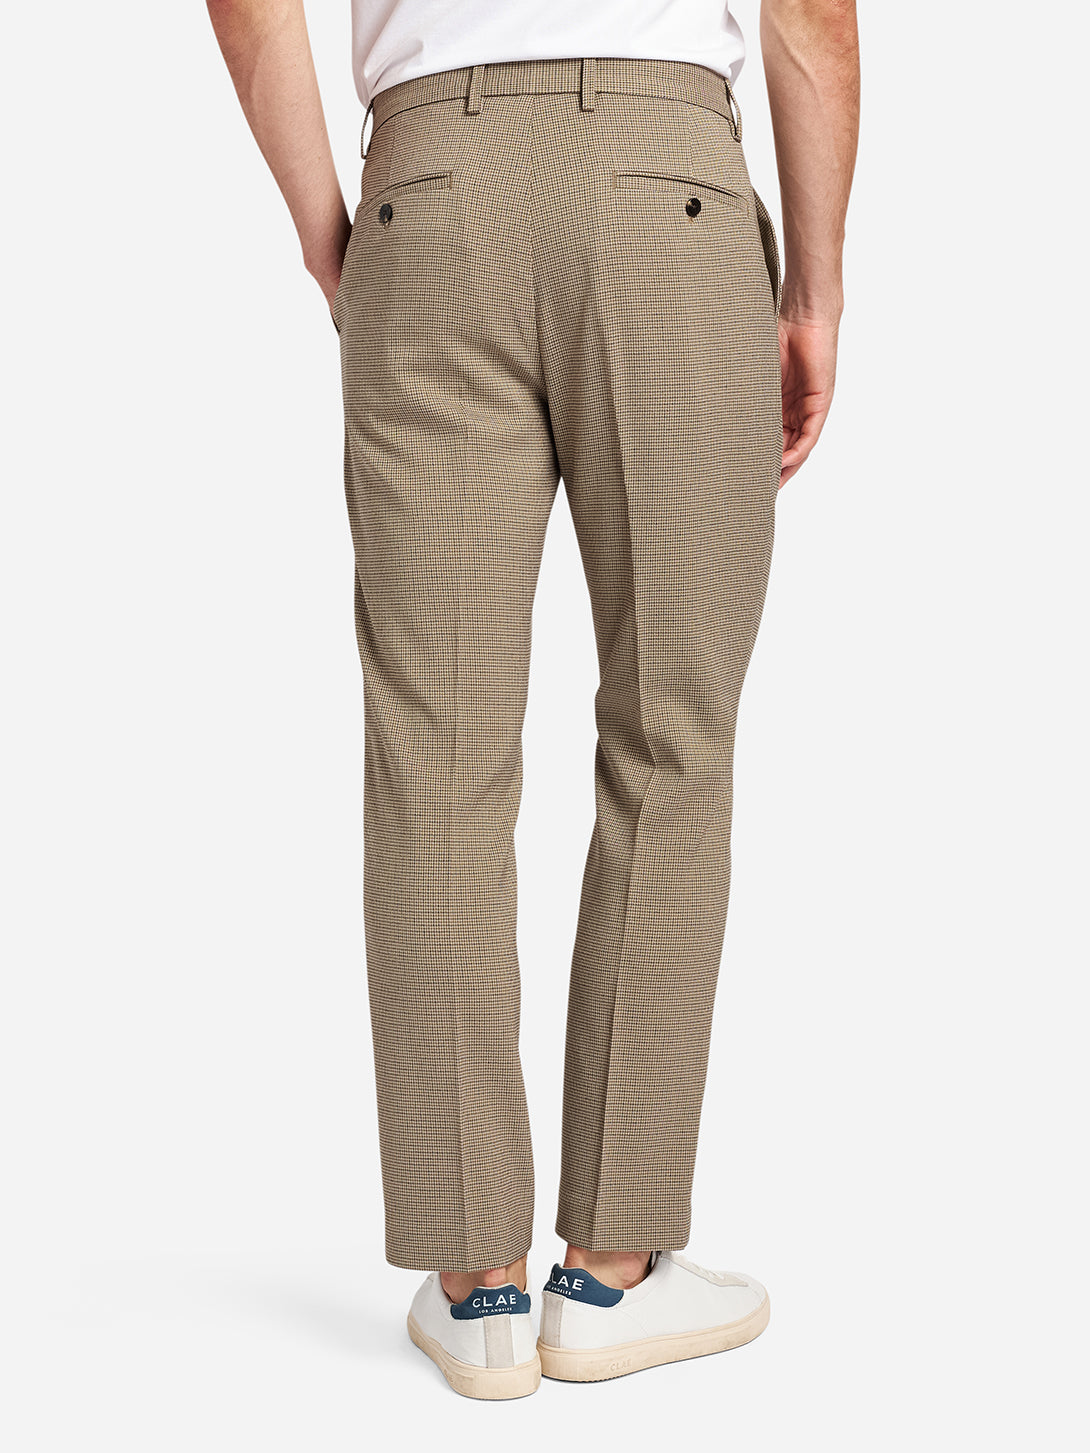 Khaki/Grey Houndstooth Niles Patterned Trousers Mens Chino Pants